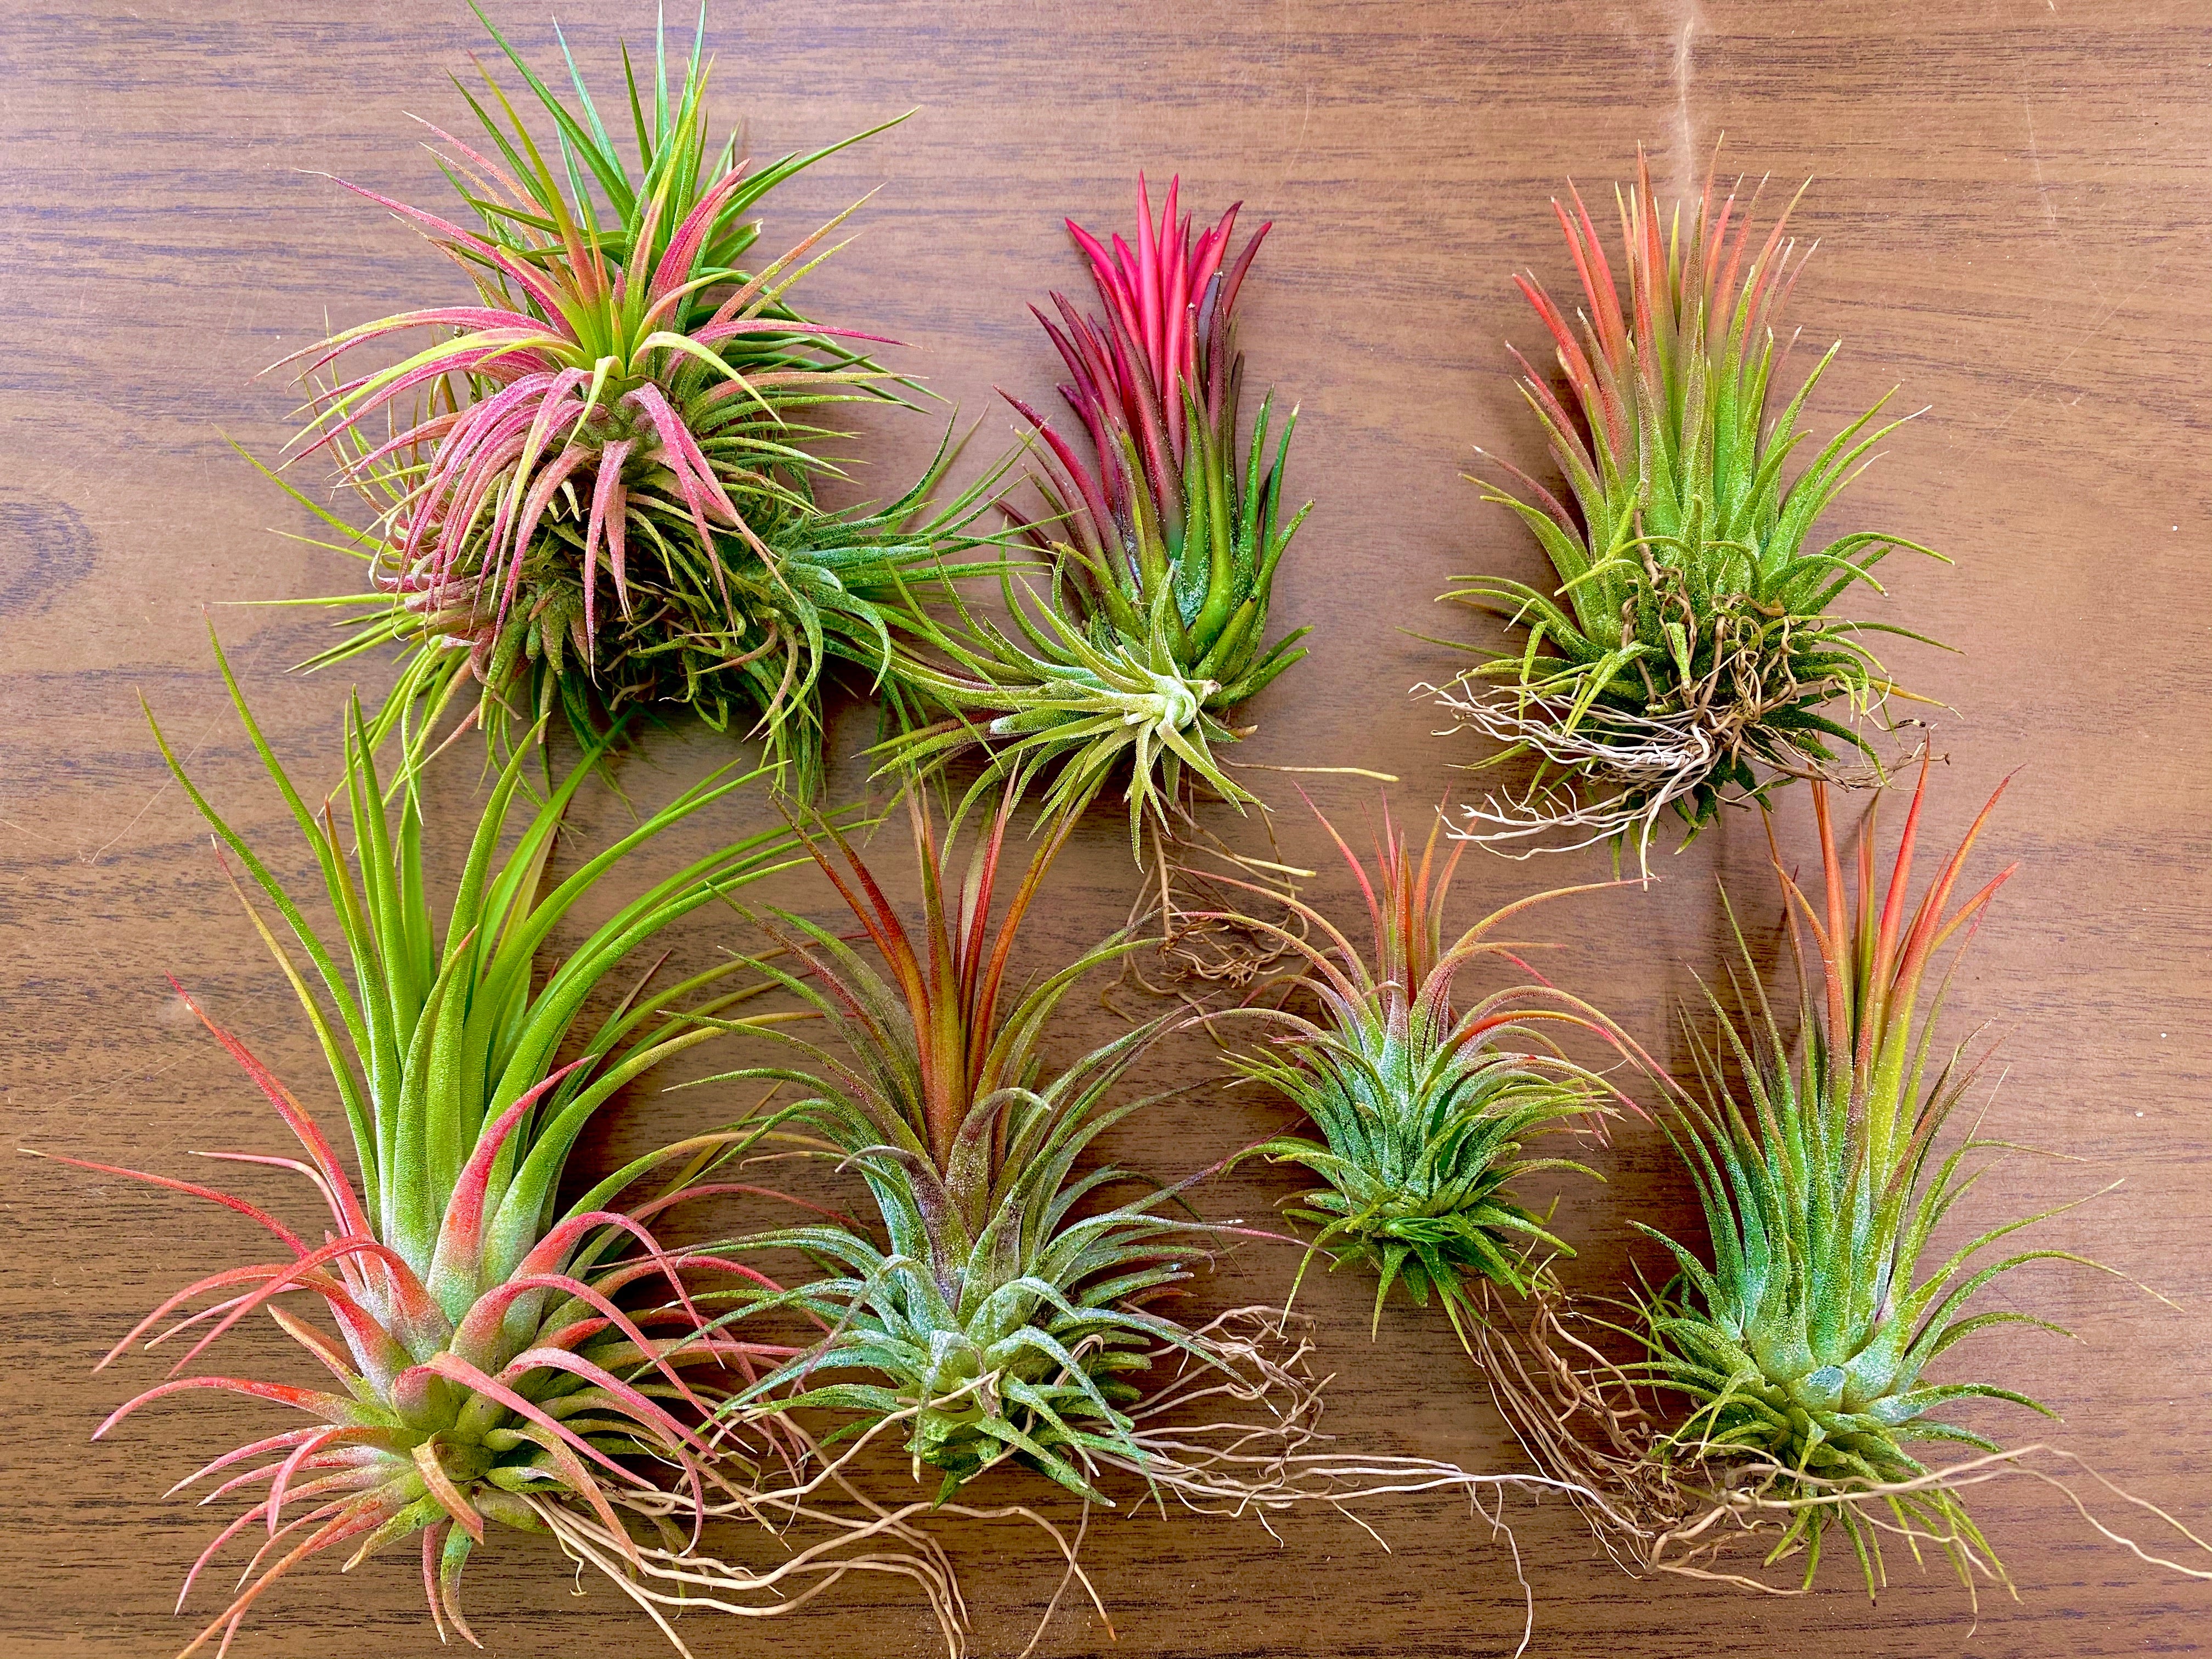 Unique ionantha variety pack <br> you will receive the set pictured